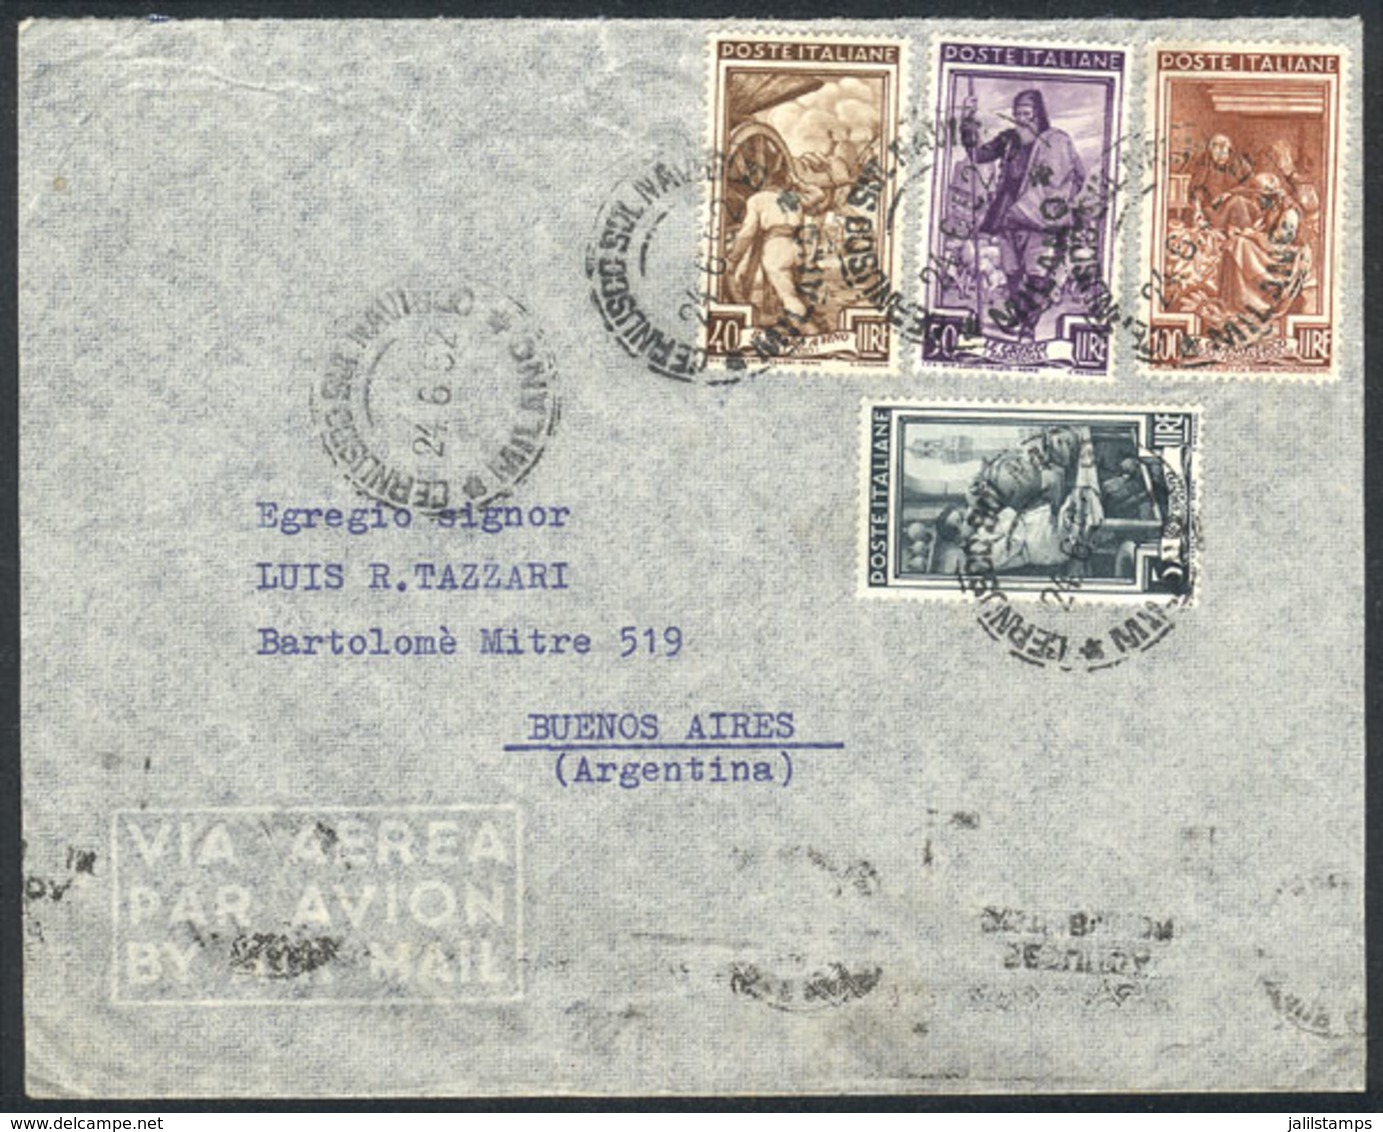 ITALY: Cover Franked By Sa.651 + Other Values (total 195L.), Sent From Cernusco To Argentina On 24/JUN/1952, Very Fine Q - Zonder Classificatie